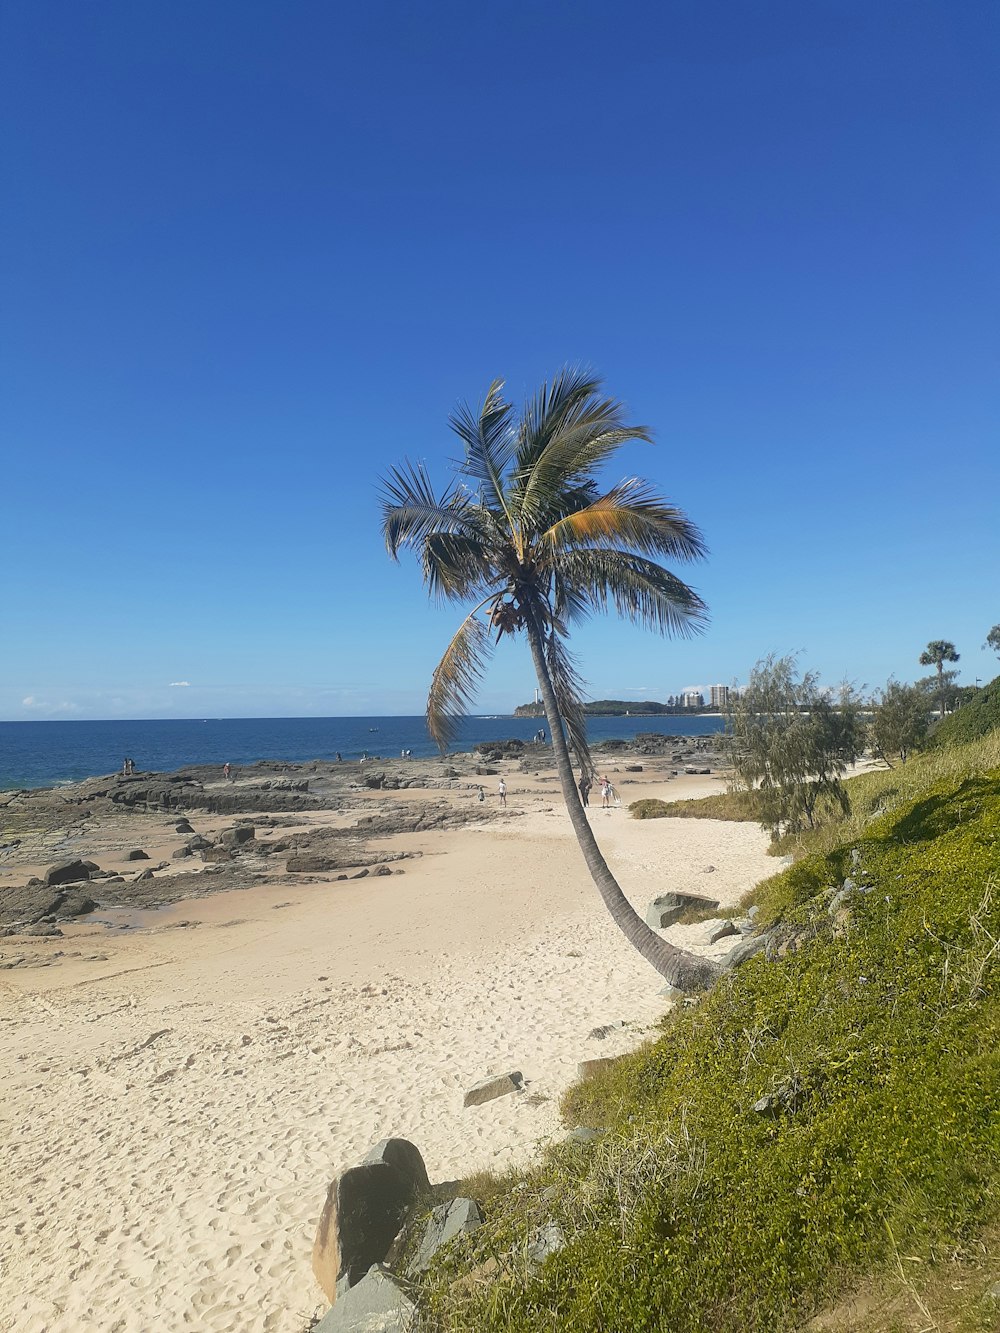 a palm tree on a sandy beach with the ocean in the background